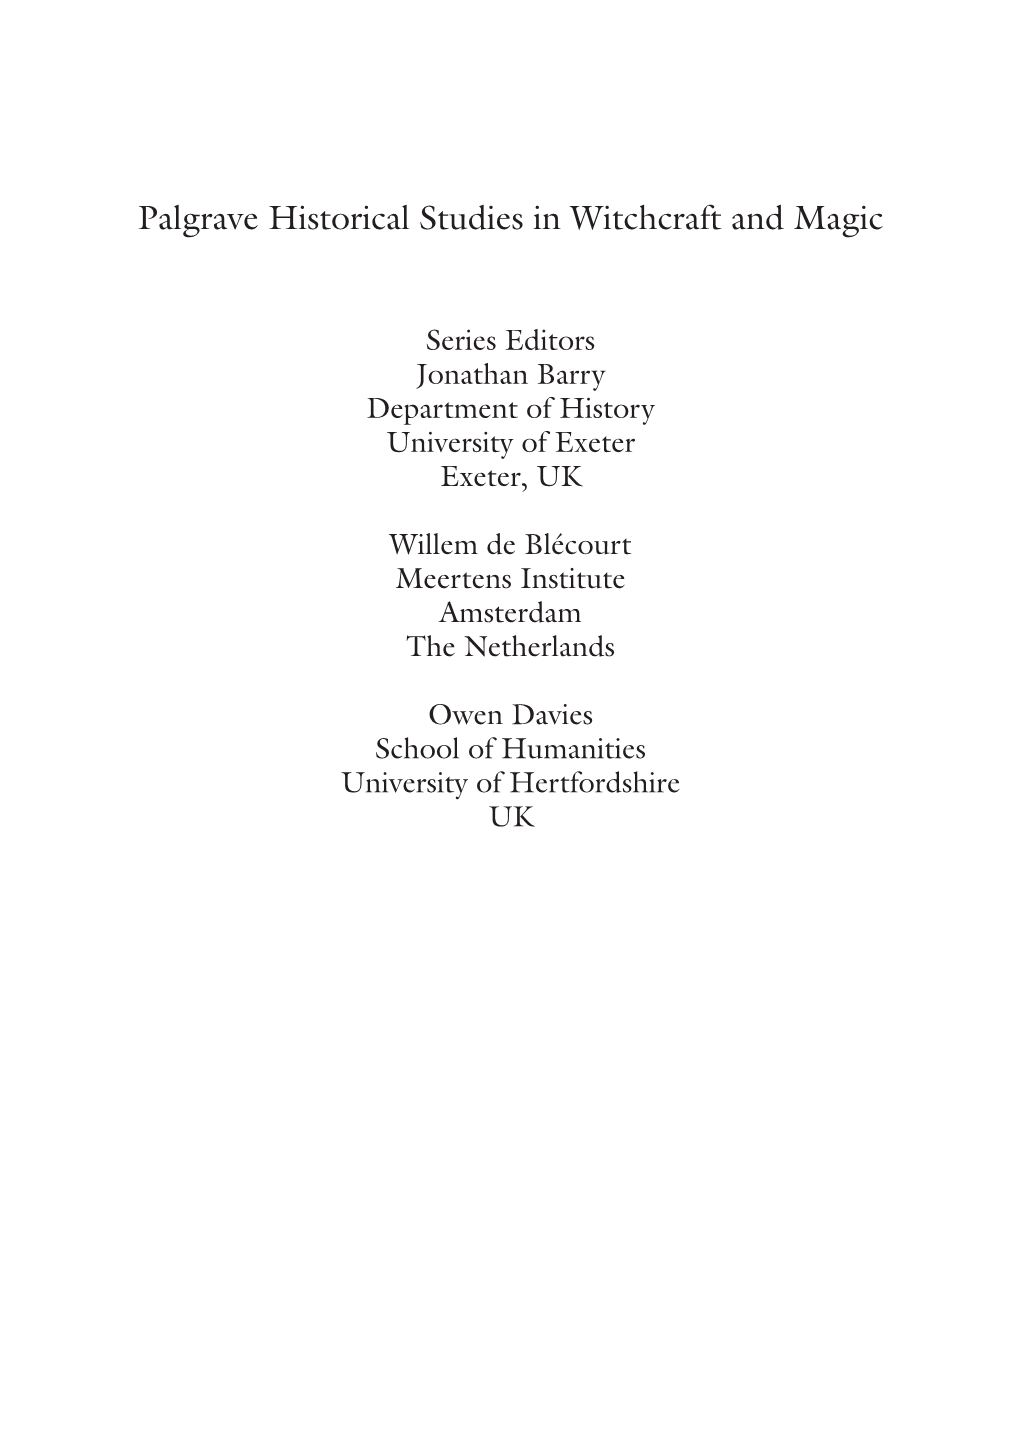 Palgrave Historical Studies in Witchcraft and Magic